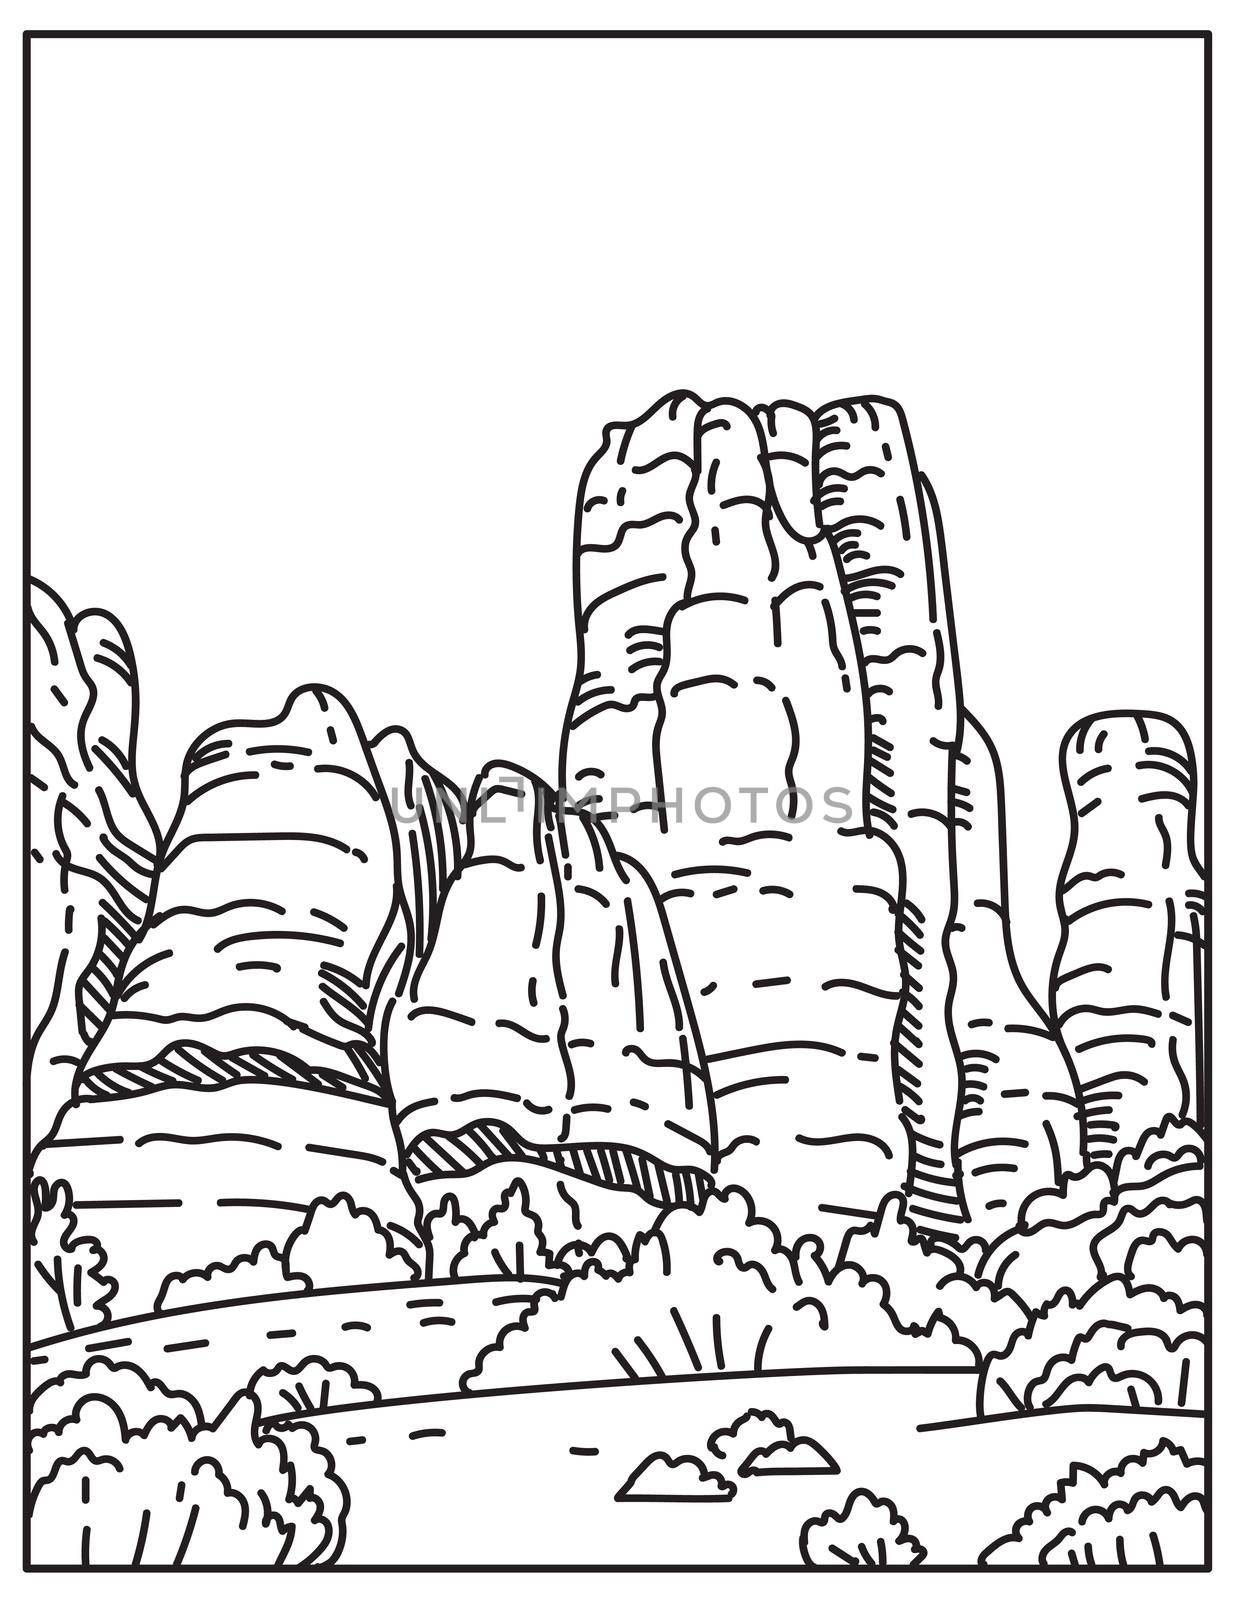 The Needles in the Southeast Corner of Canyonlands National Park in Utah United States Mono Line or Monoline Black and White Line Art by patrimonio